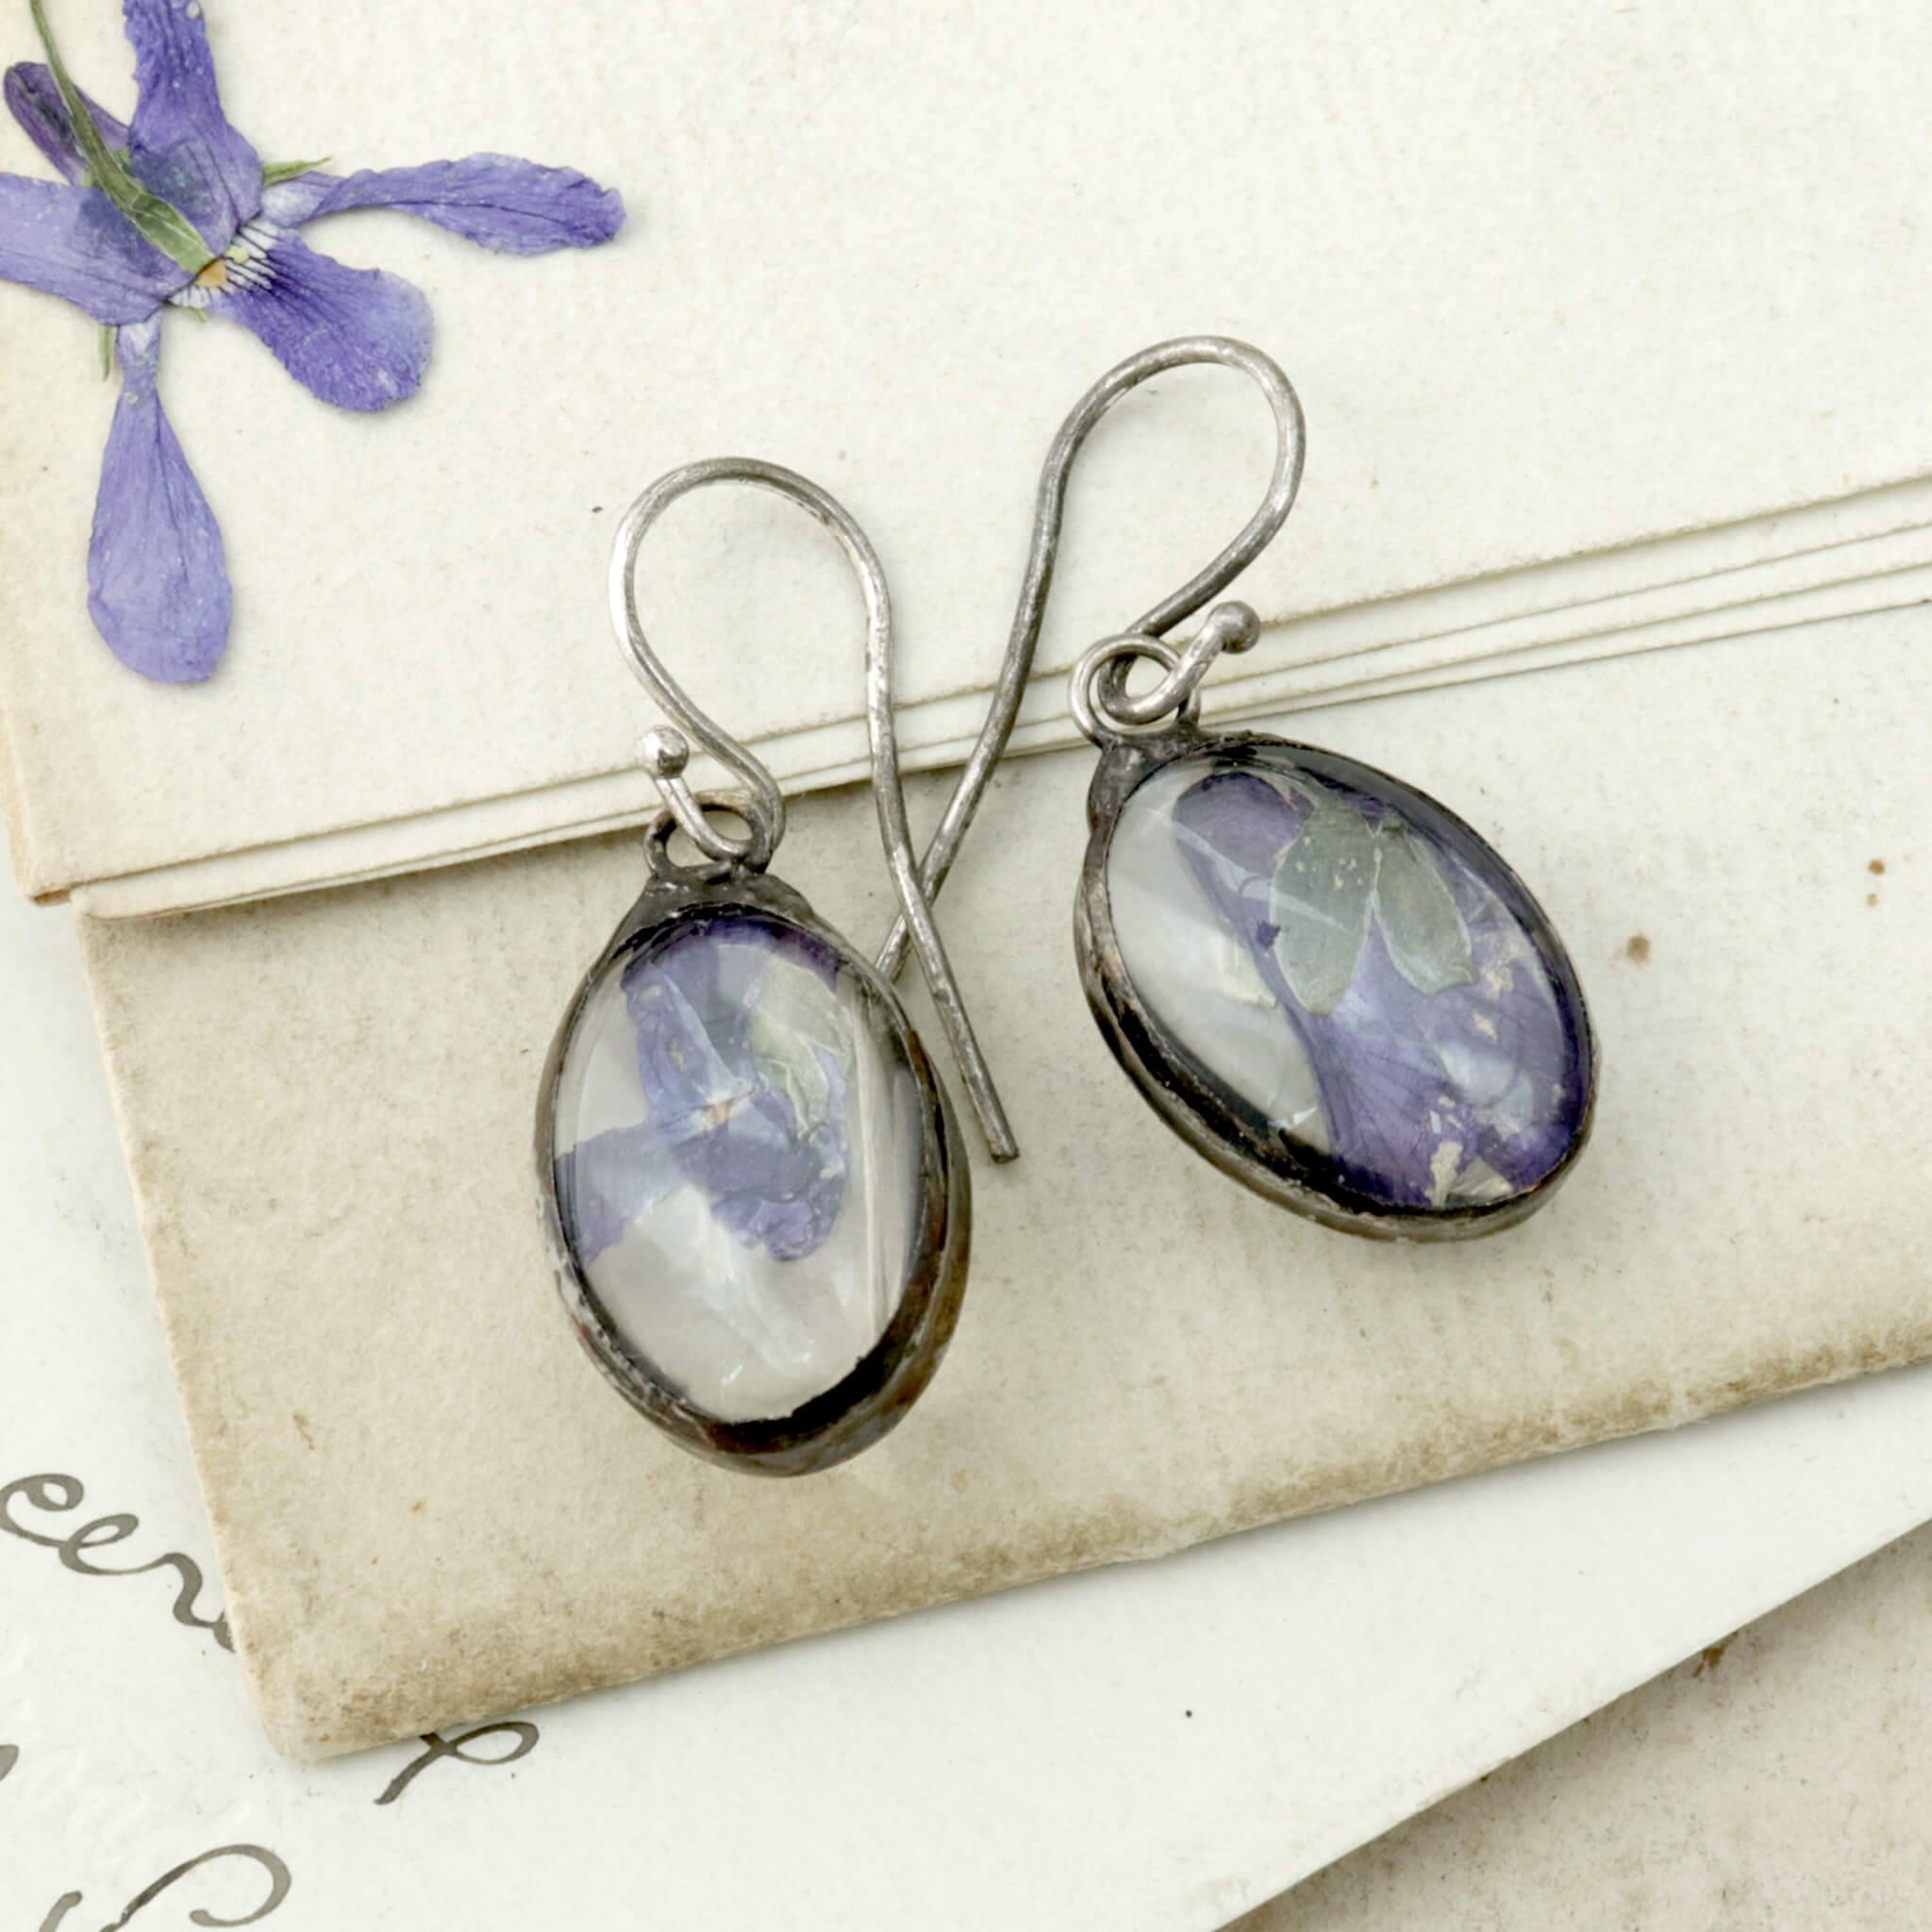 Earrings with real sweet violet flowers lying on an old letter